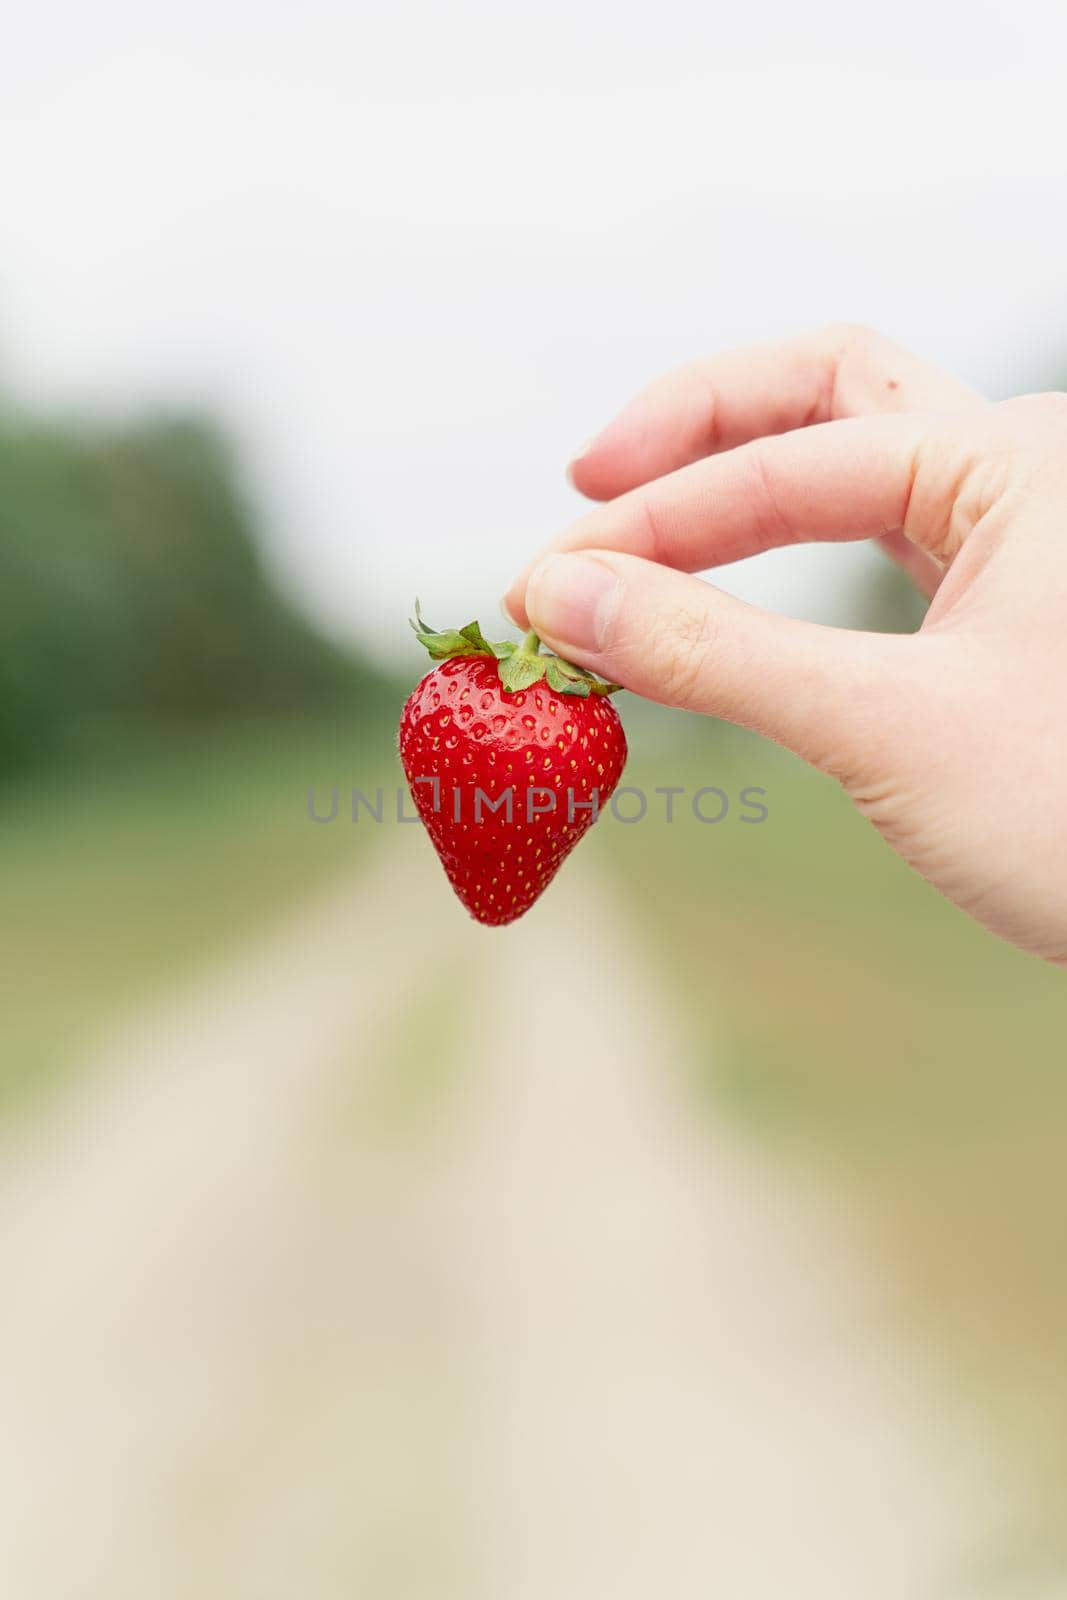 Holding strawberry in hand on green background. Seasonal red berry.